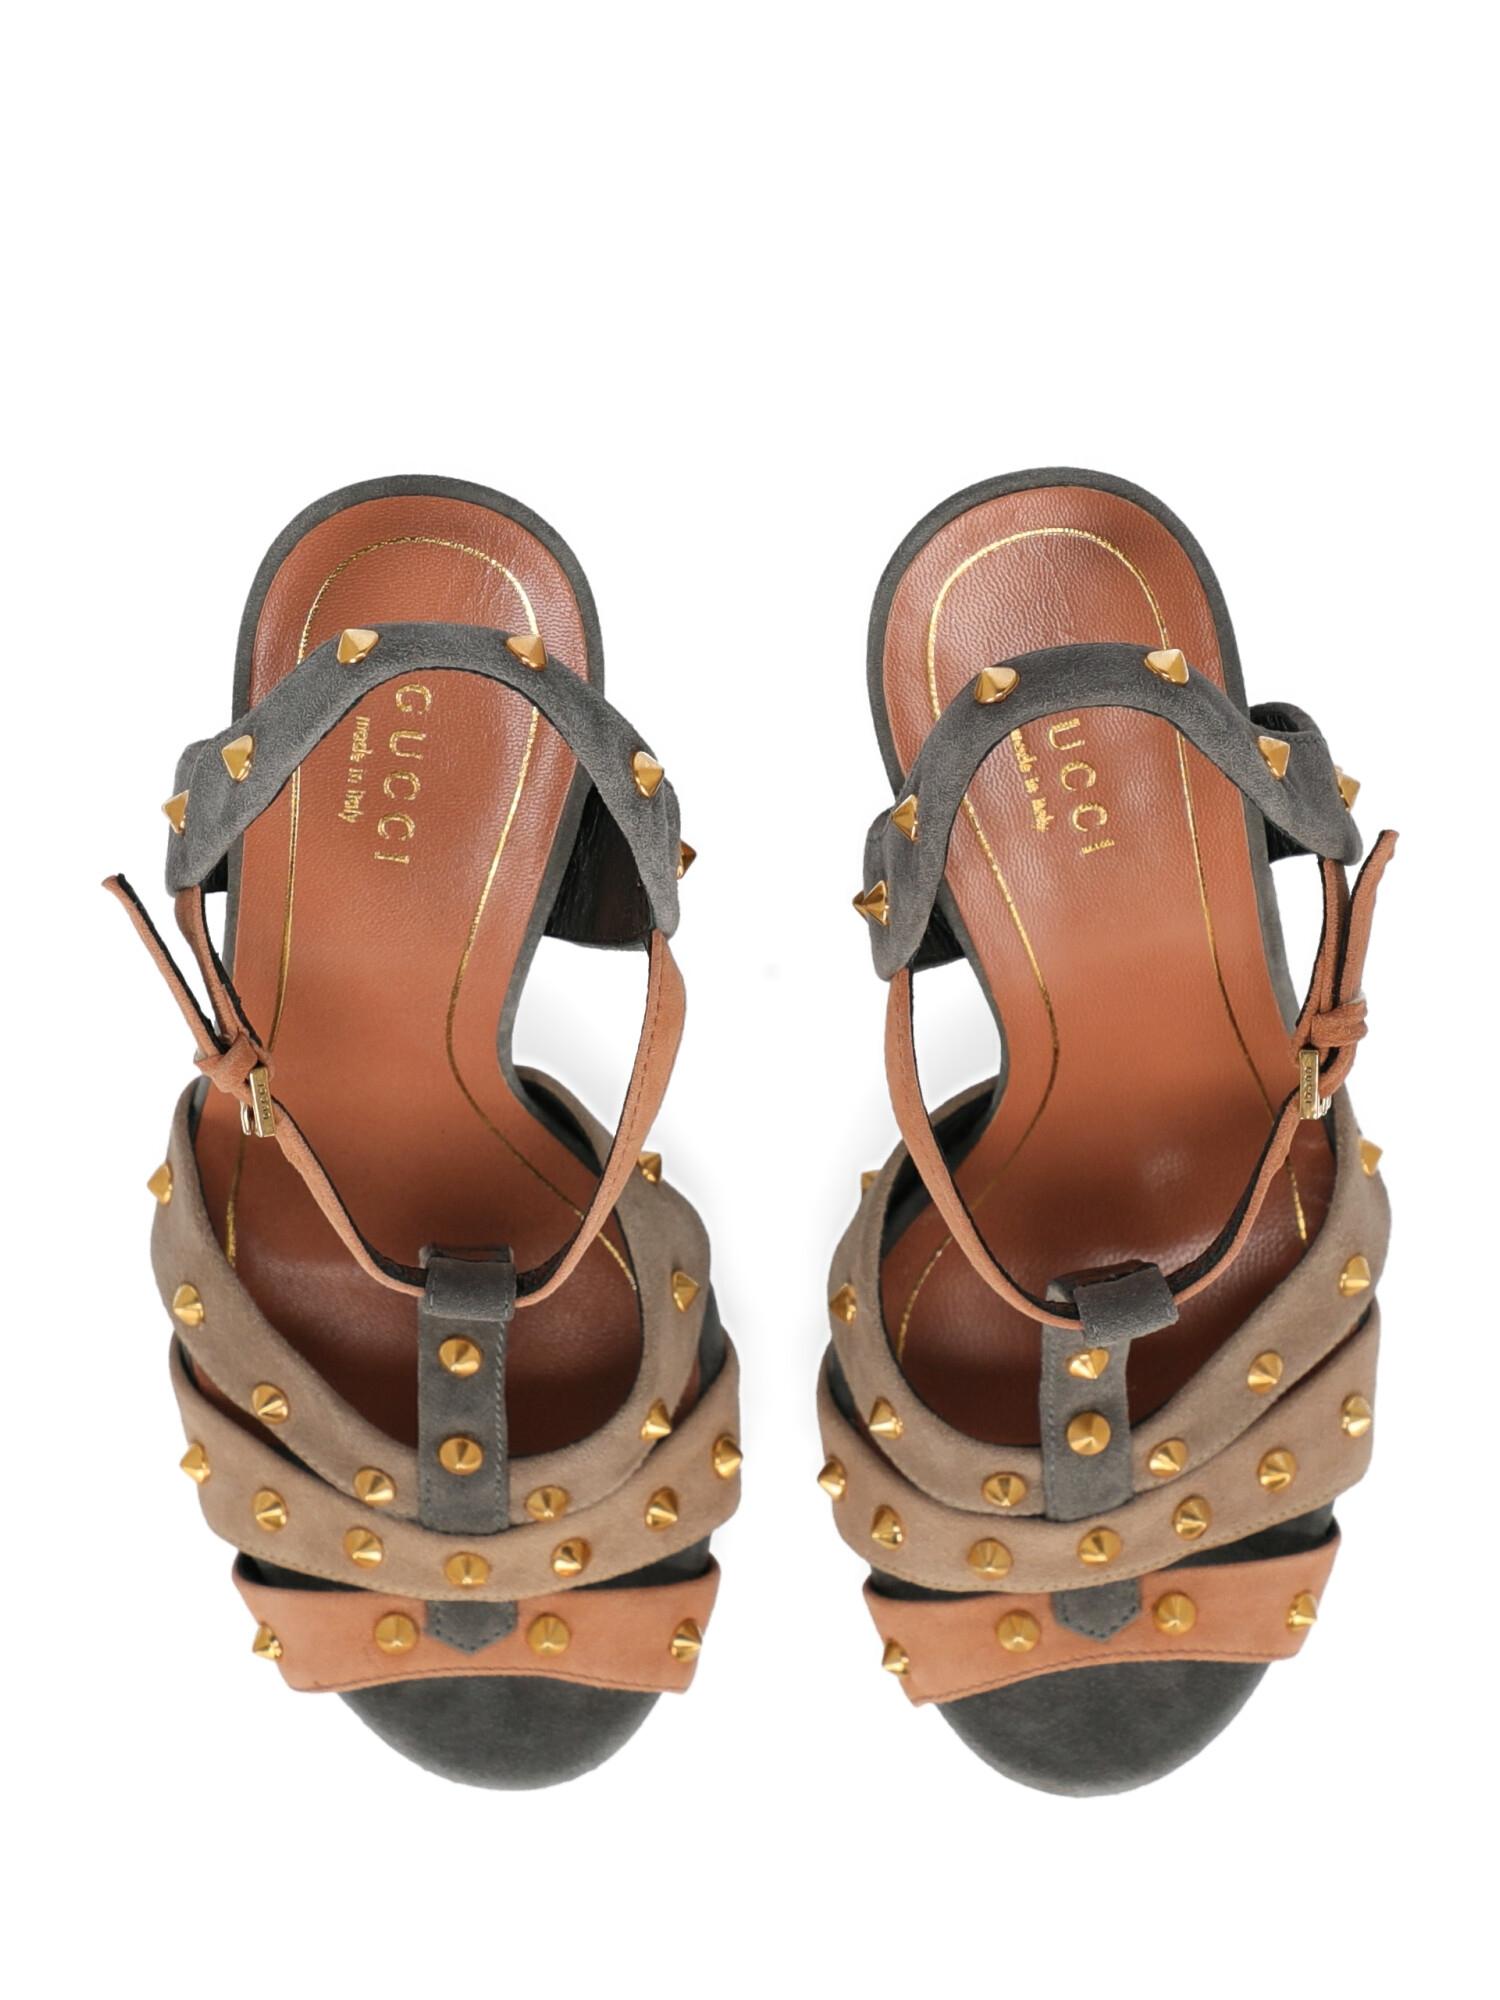 Gucci Woman Sandals Beige Leather IT 36.5 For Sale 2